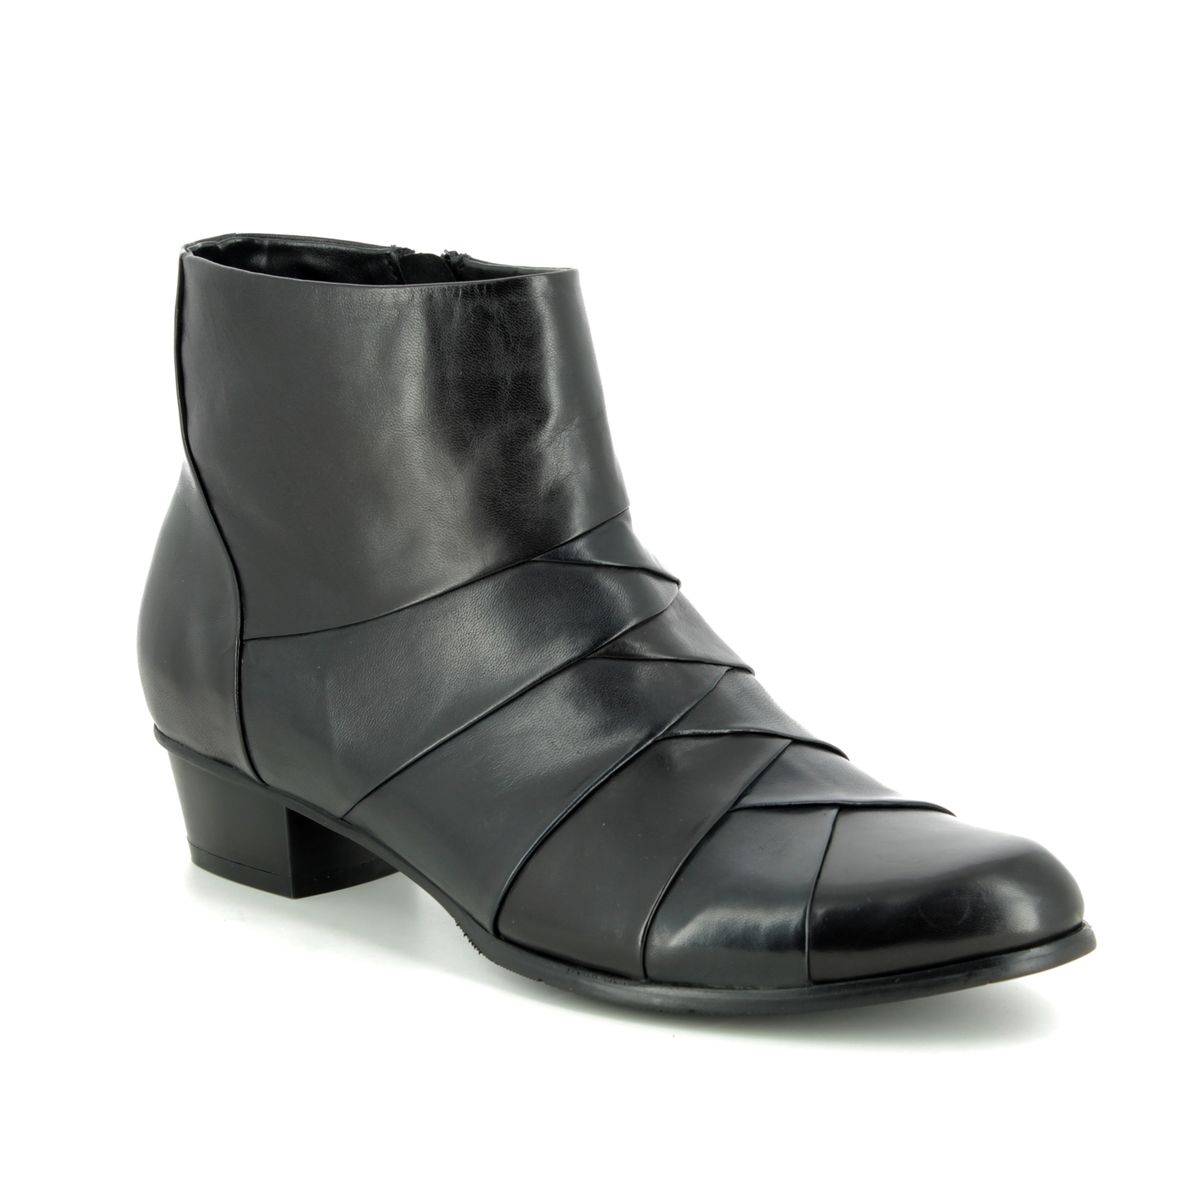 Regarde Le Ciel Stefany 172 Black Navy Womens Boots 9118-30 Ankle Boots In Soft Black Navy Leather In Size 39